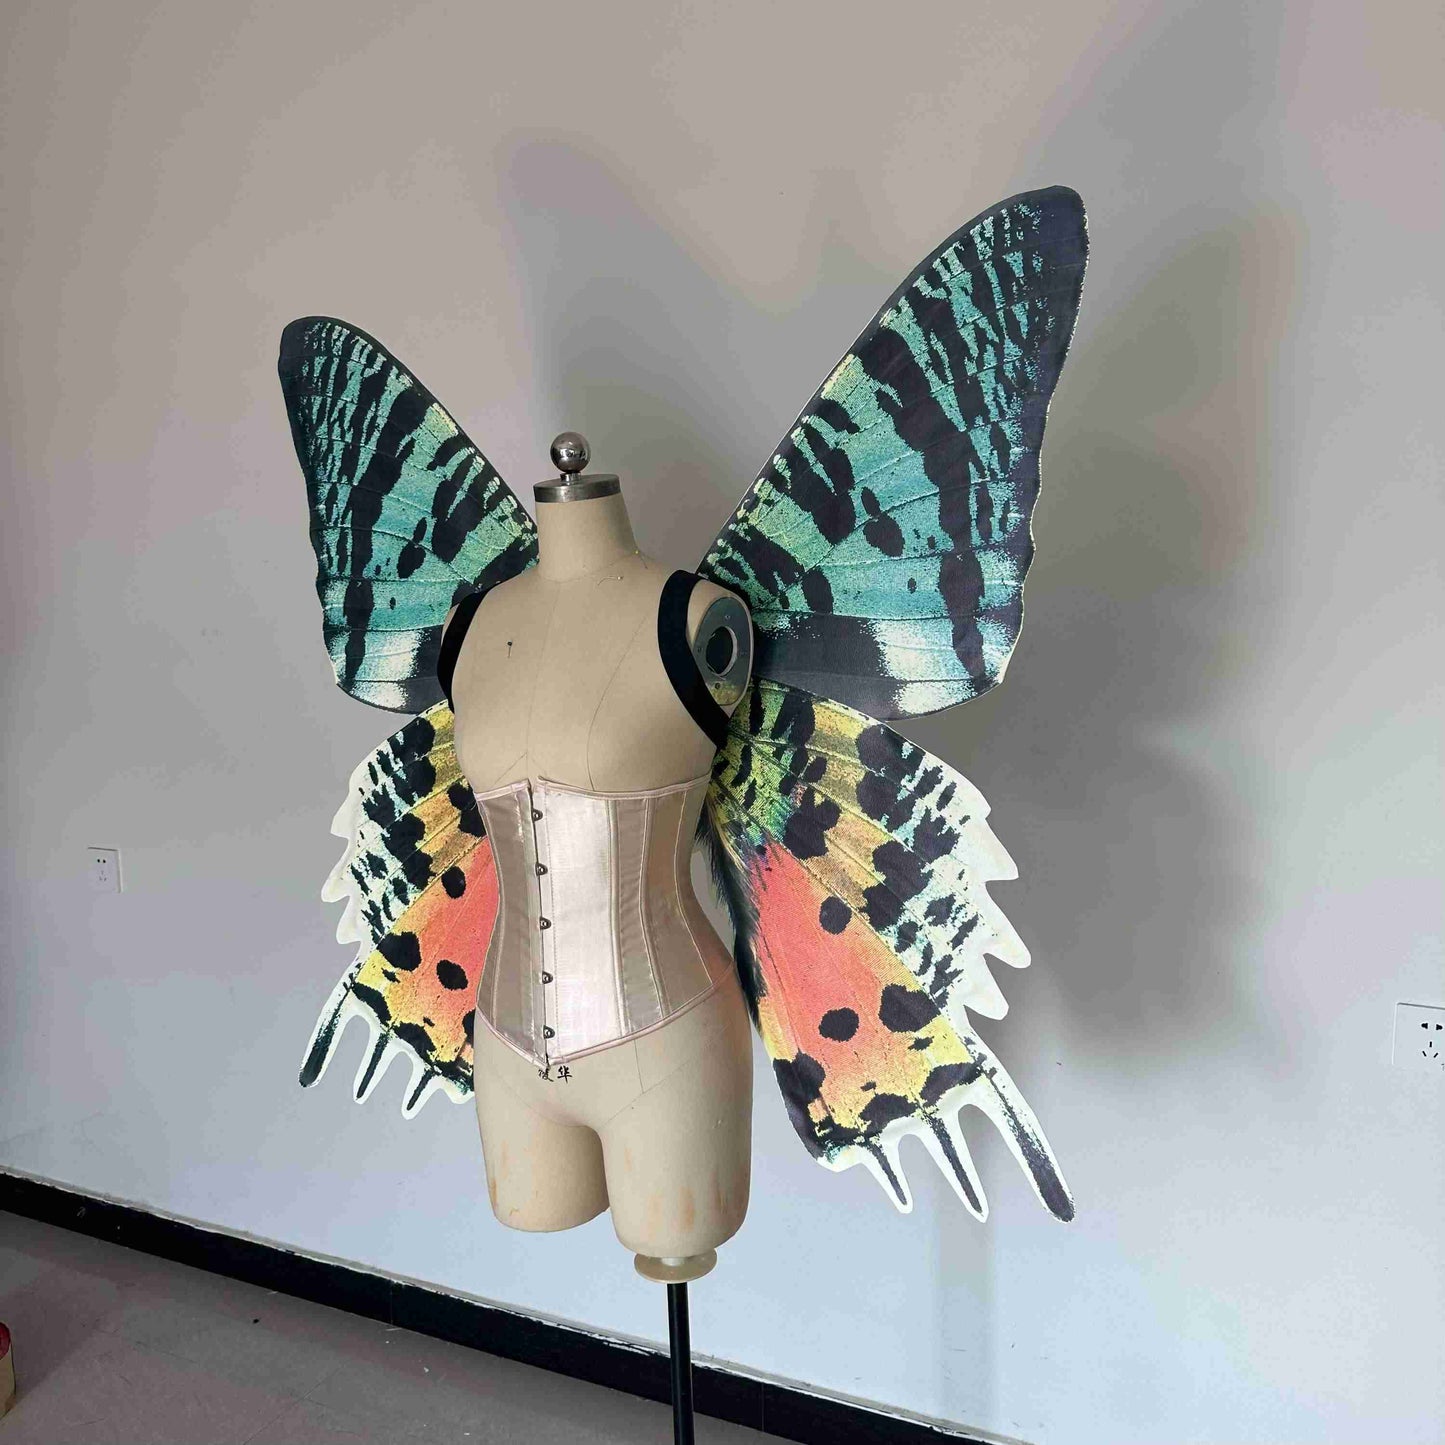 Our sky orange butterfly wings from the left side. Made from cloth. Can be also named fairy wings or pixie wings.